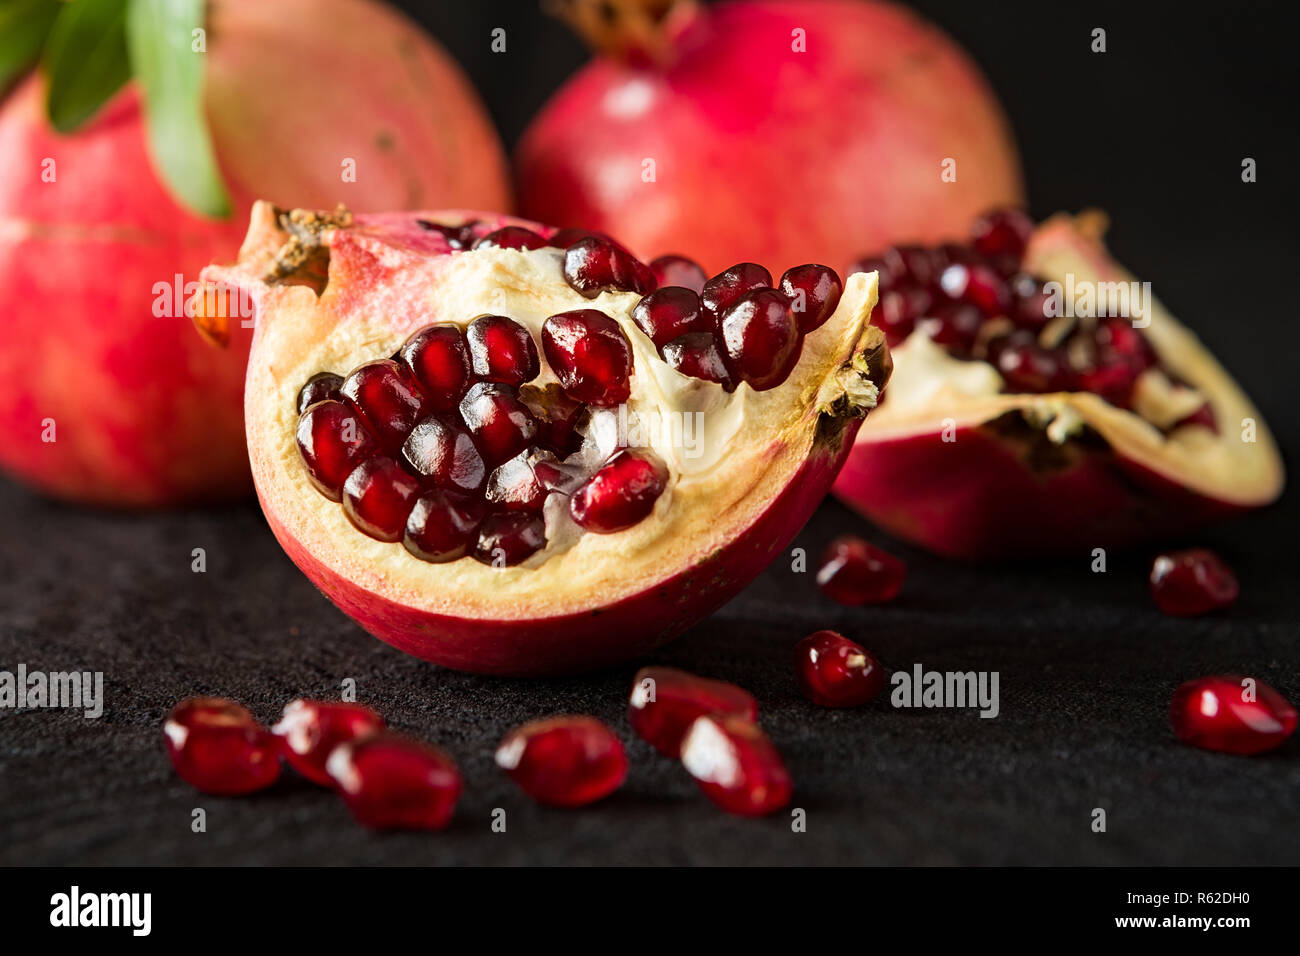 Red Gold Juicy Thick Textured Cut Pomegranate with Seeds Throw